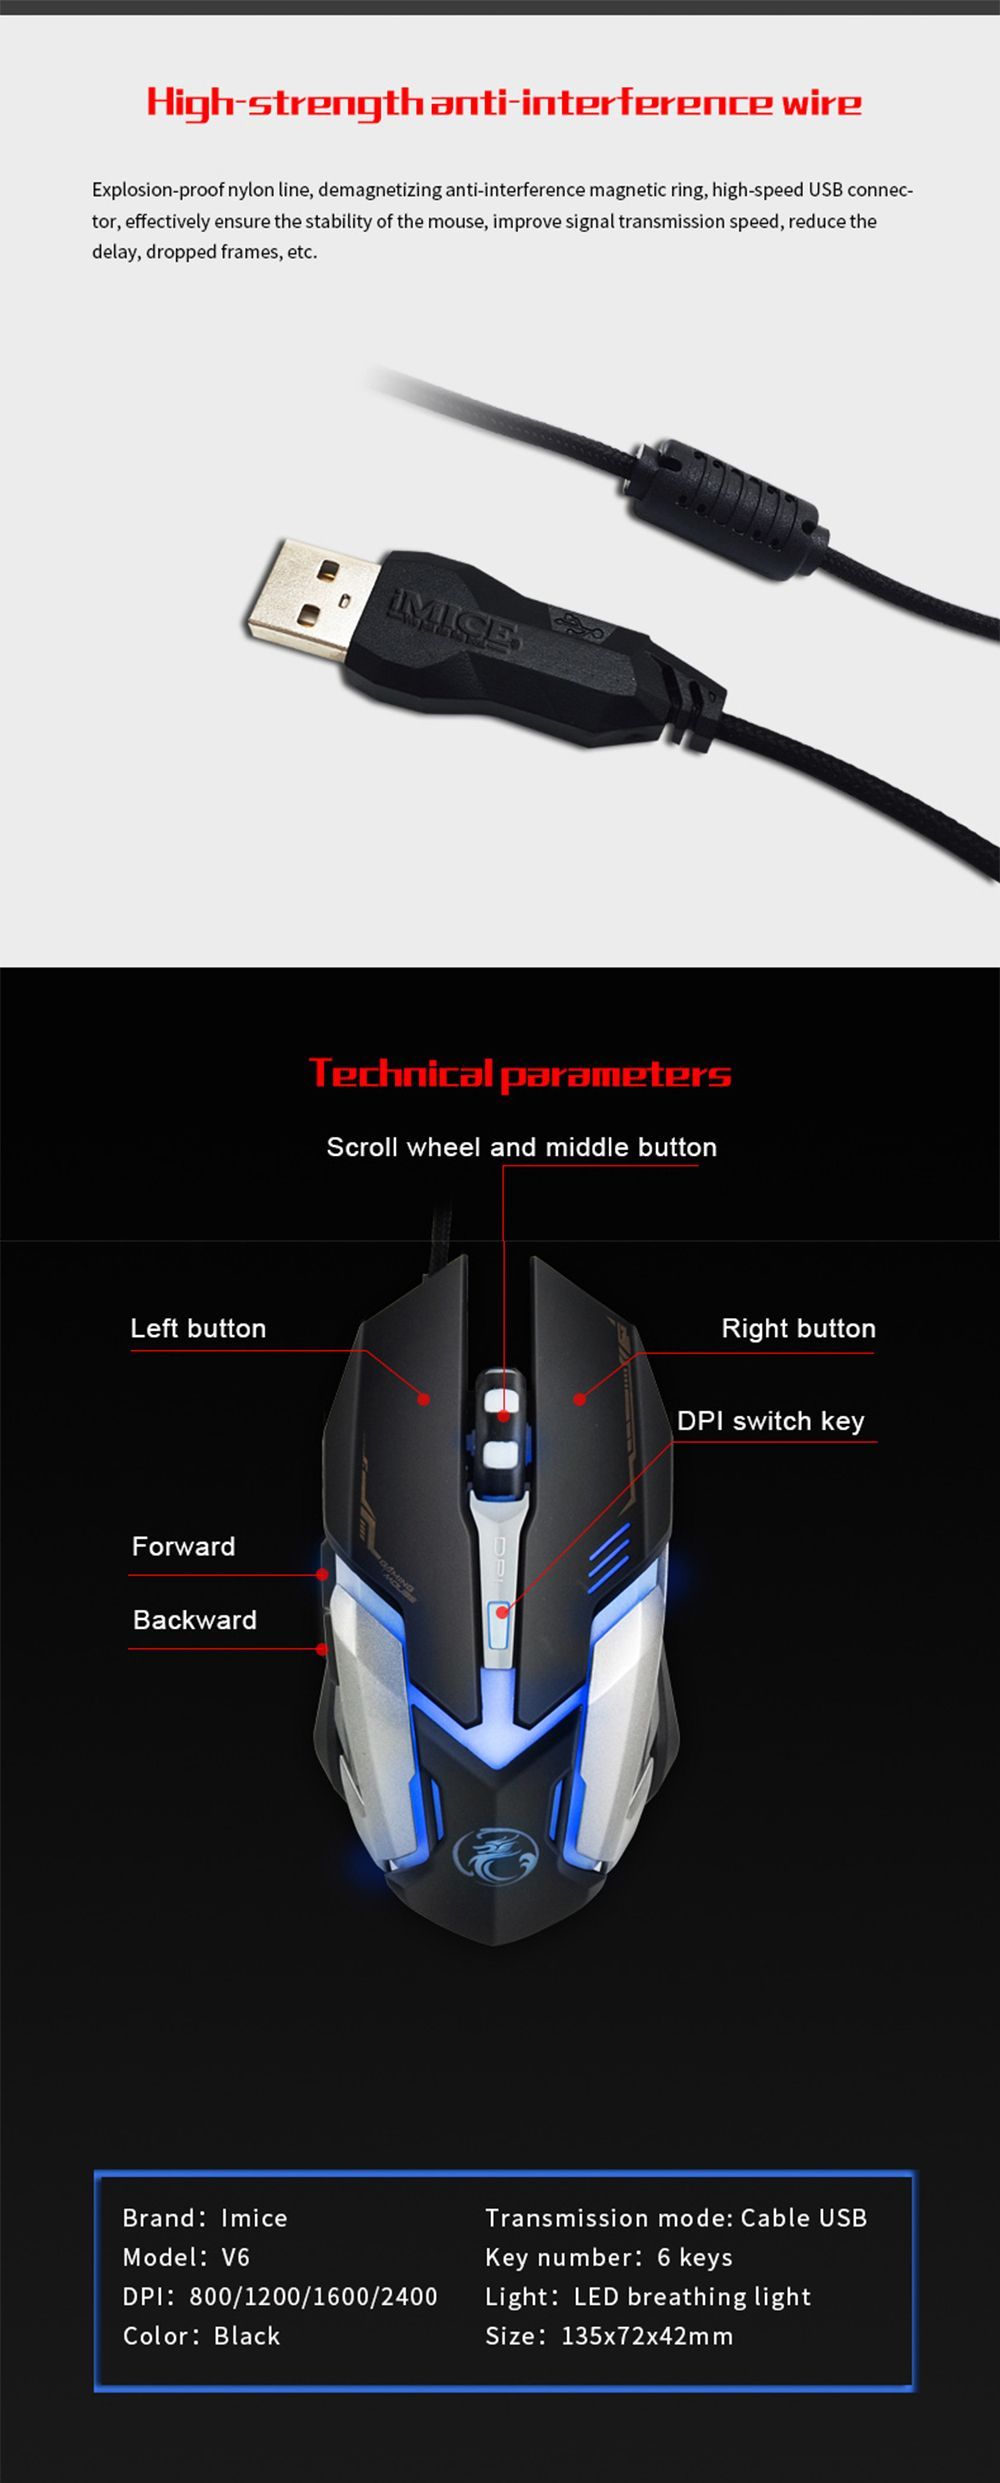 IMICE-V6-3200-DPI-Adjustable-USB-Wired-RGB-Optical-Gaming-Mouse-With-6-Buttons-1557891